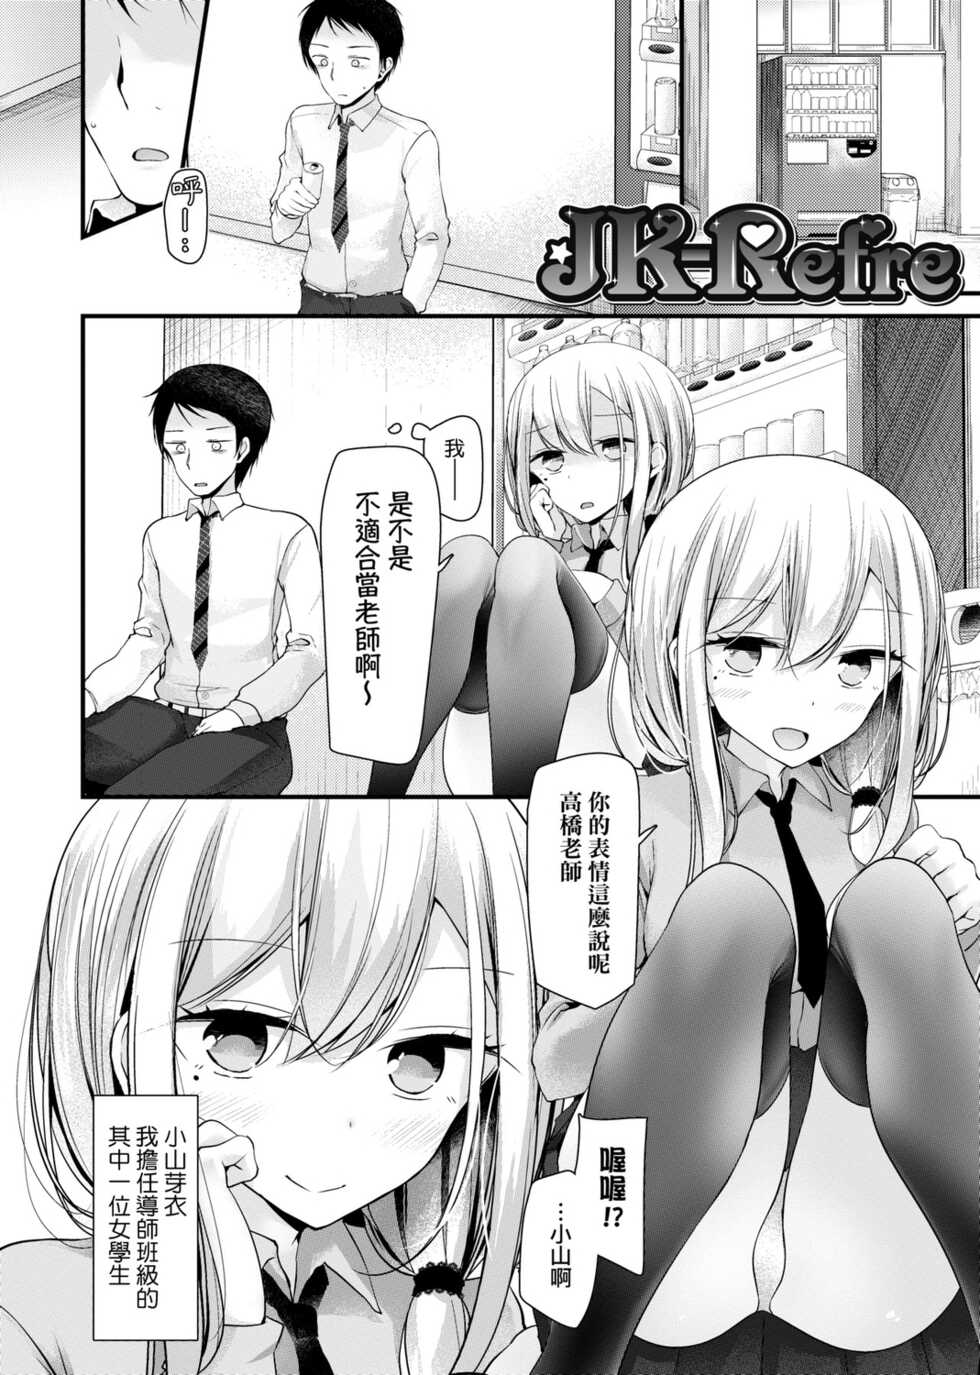 [Oouso] JK REFLE [Chinese] [Digital] - Page 6